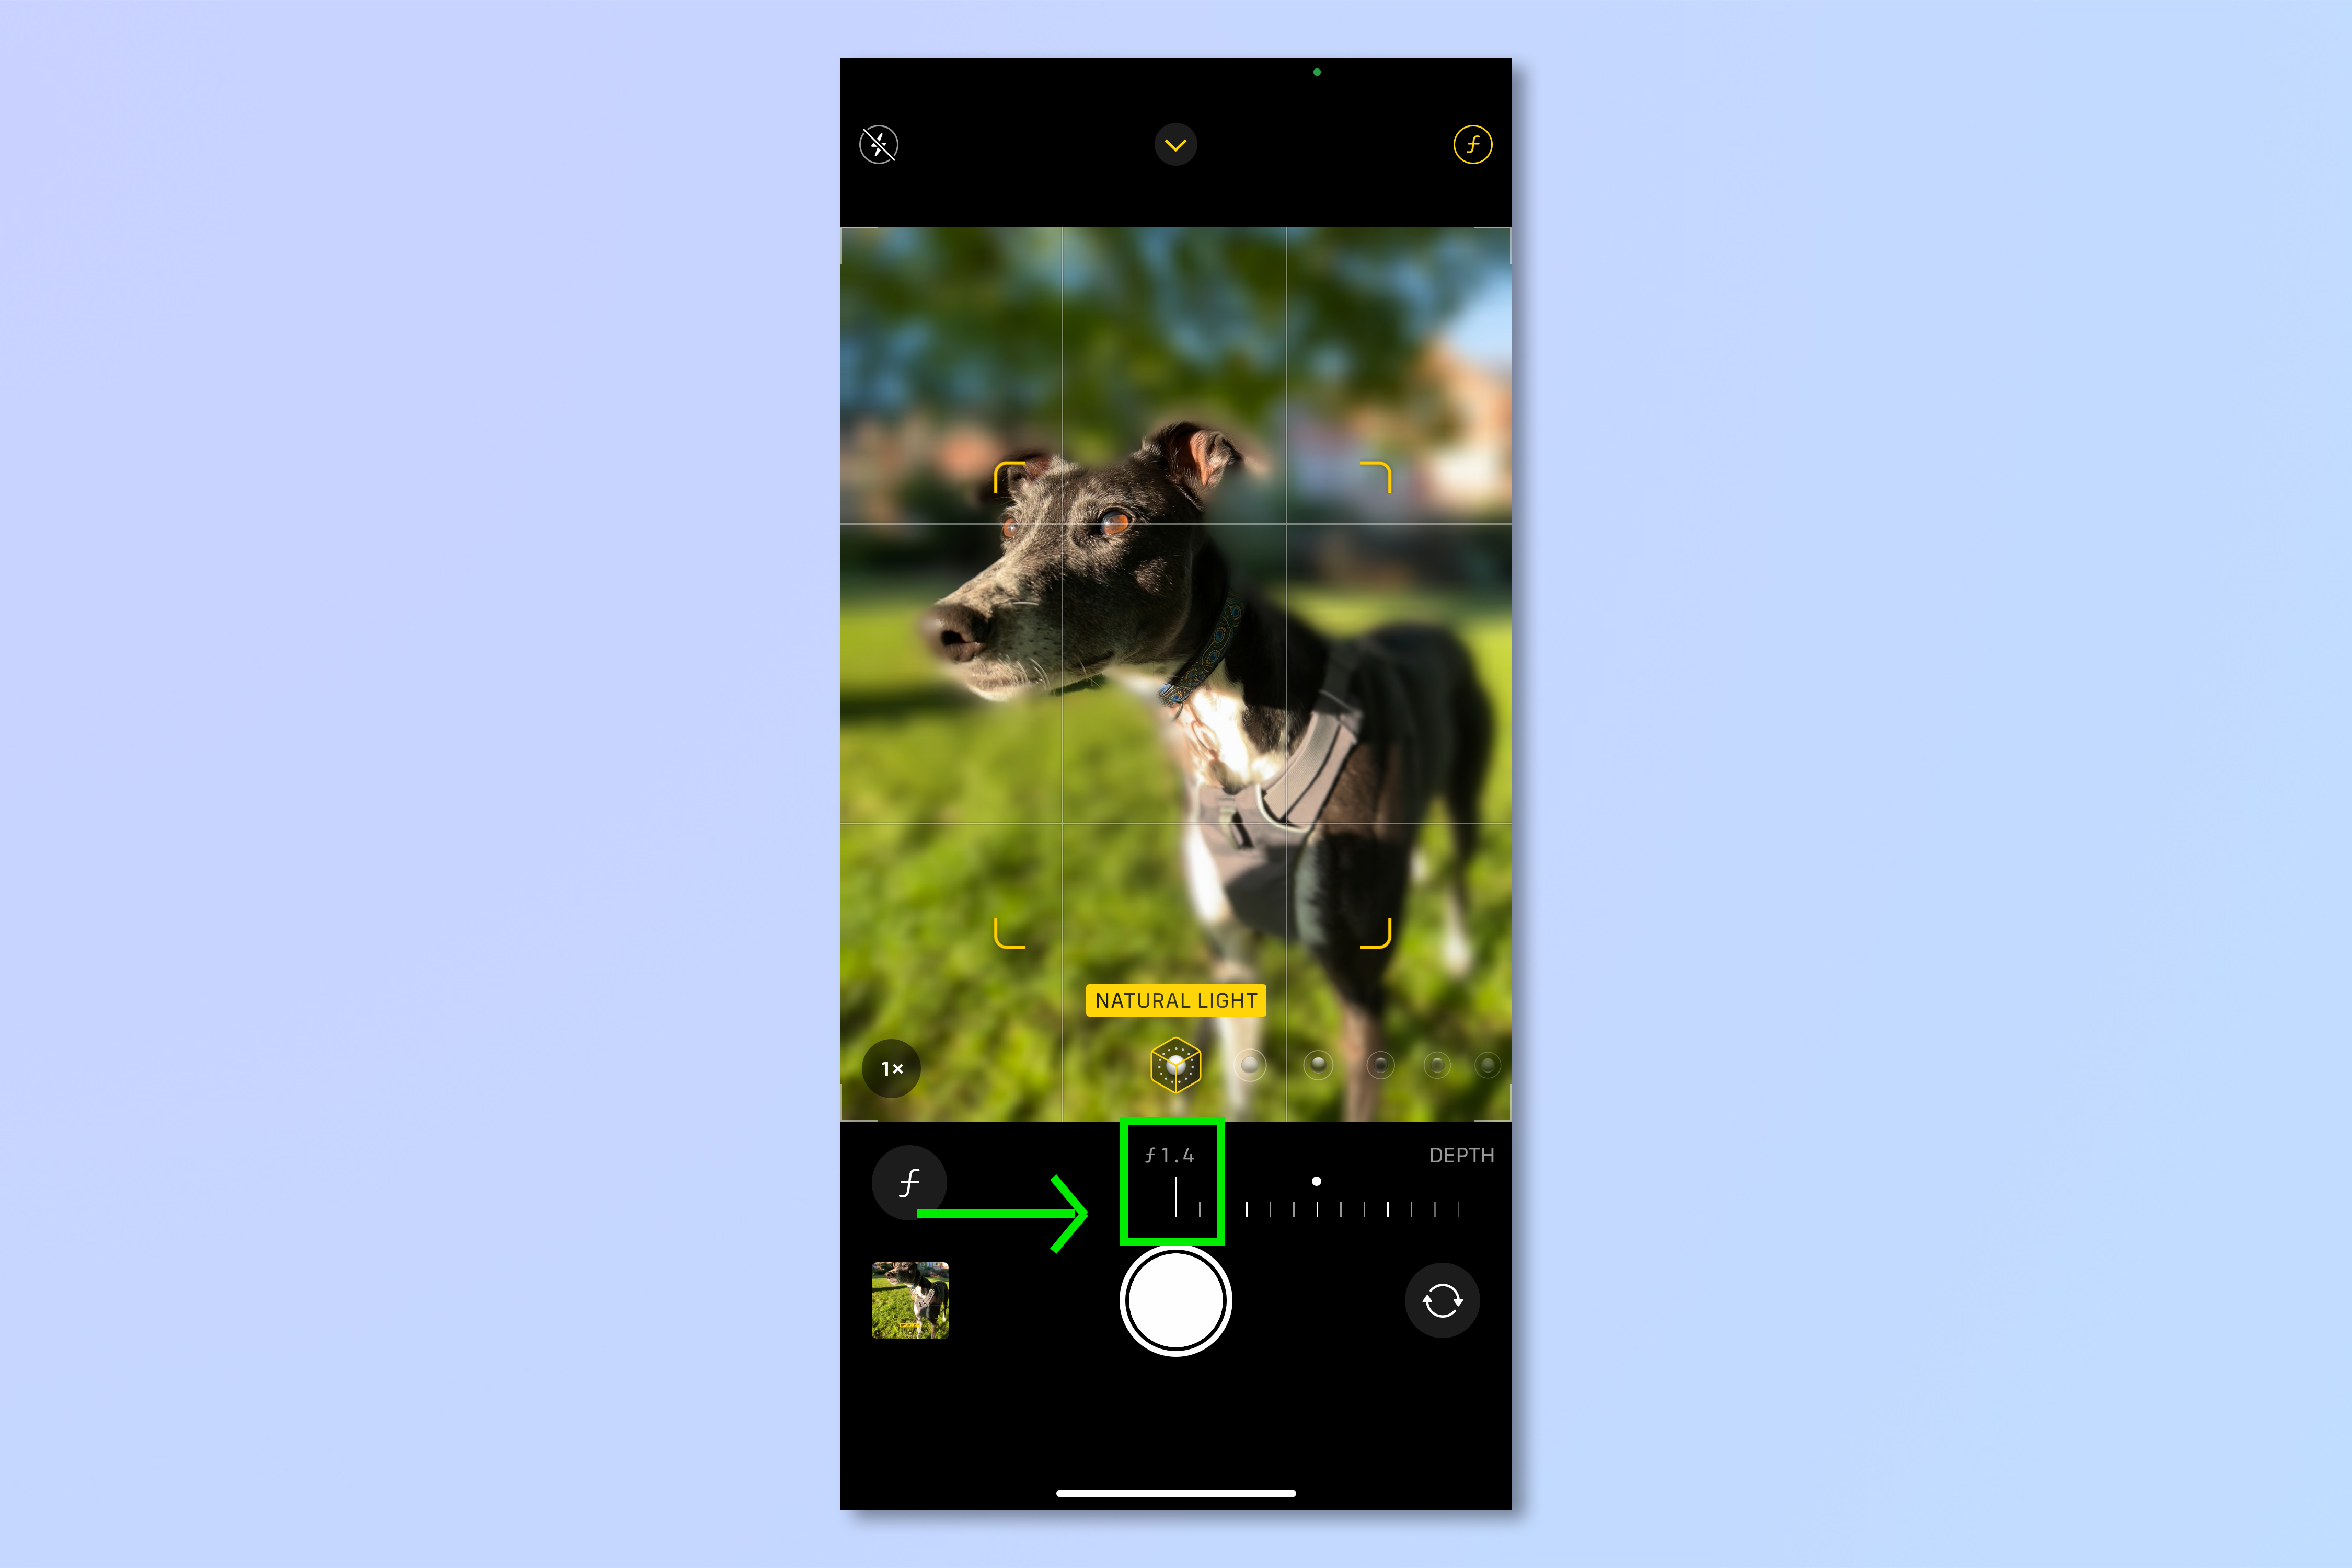 An iPhone screenshot of a greyhound pictured in the iPhone camera, demonstrating the steps required to blur the background of iPhone photos